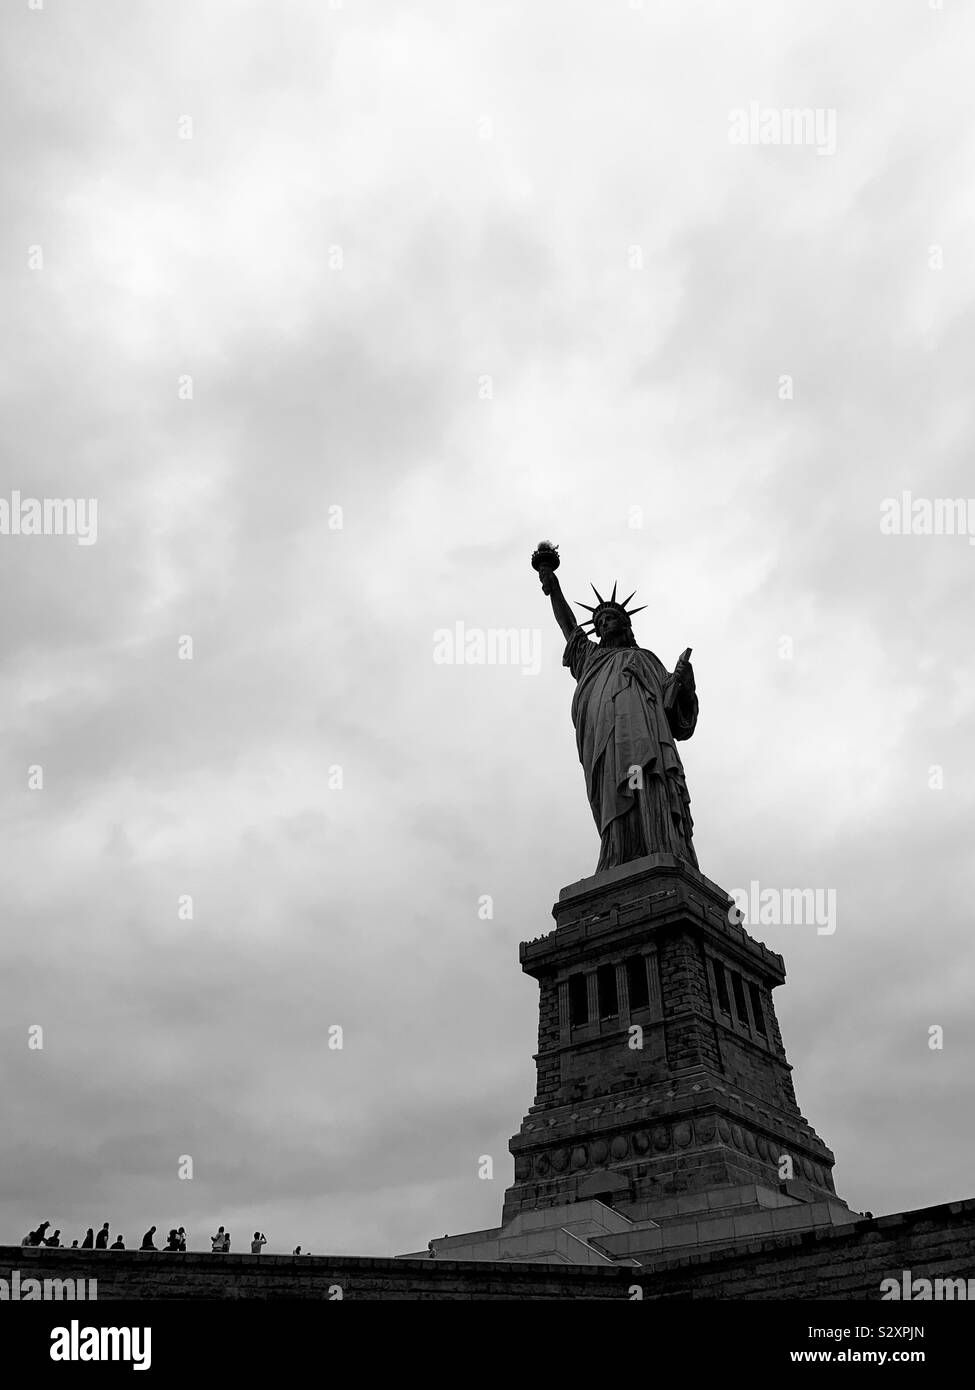 People looking and taking photos at the Statue of Liberty. Ny, New York, USA. Stock Photo